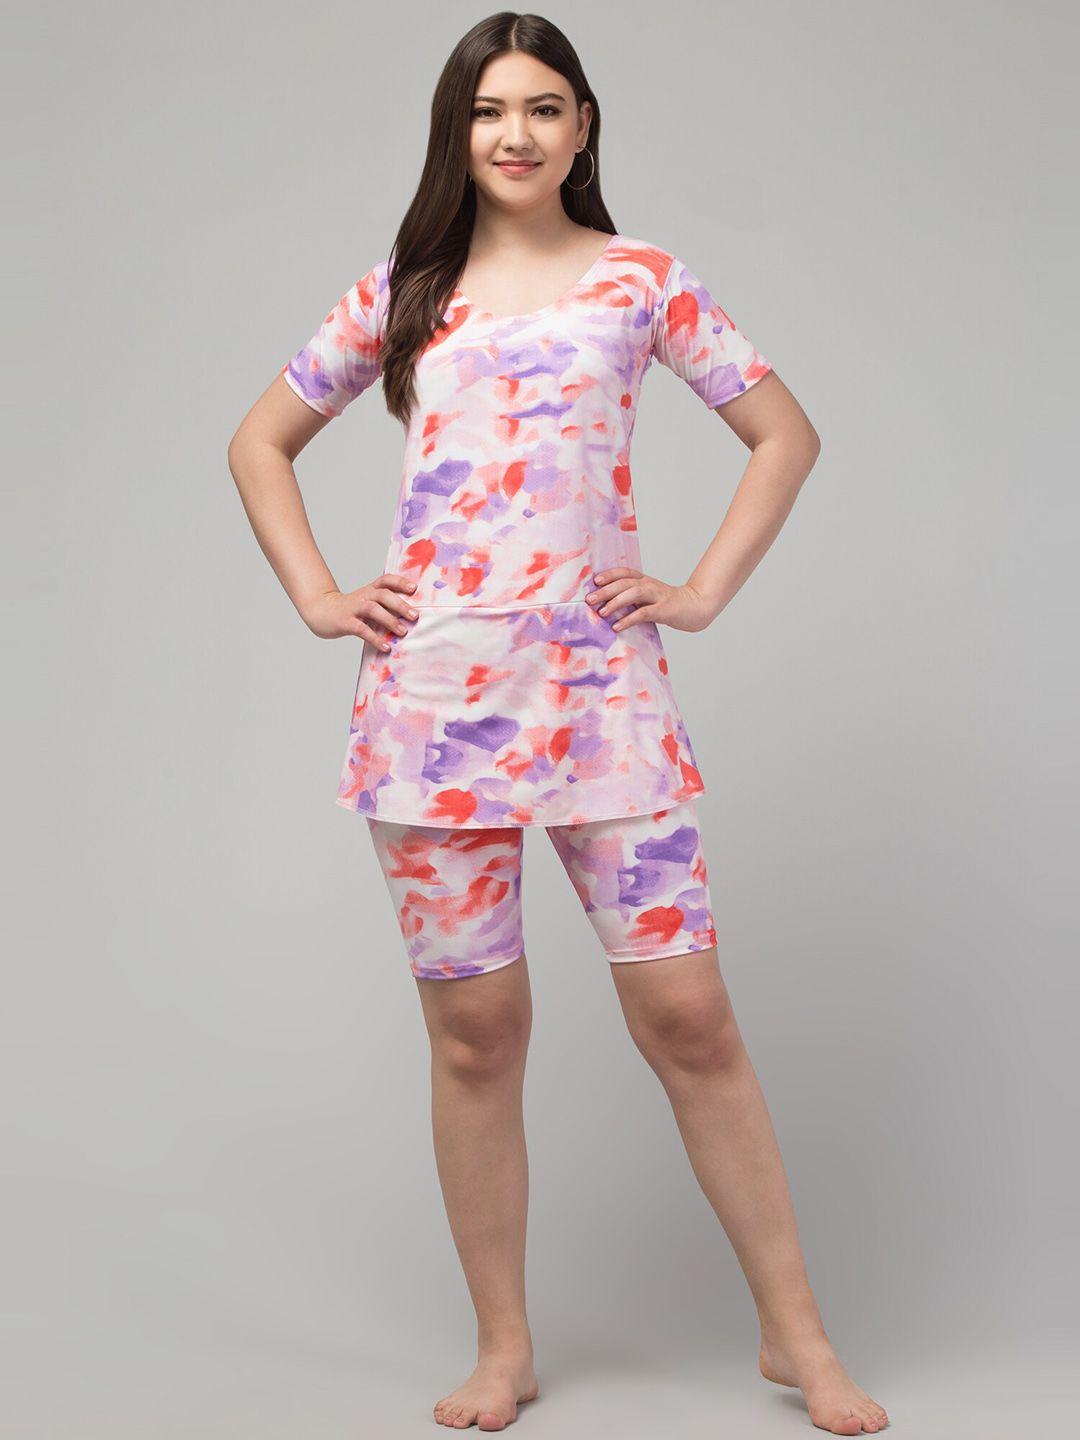 apraa & parma abstract printed swimwear with attached shorts